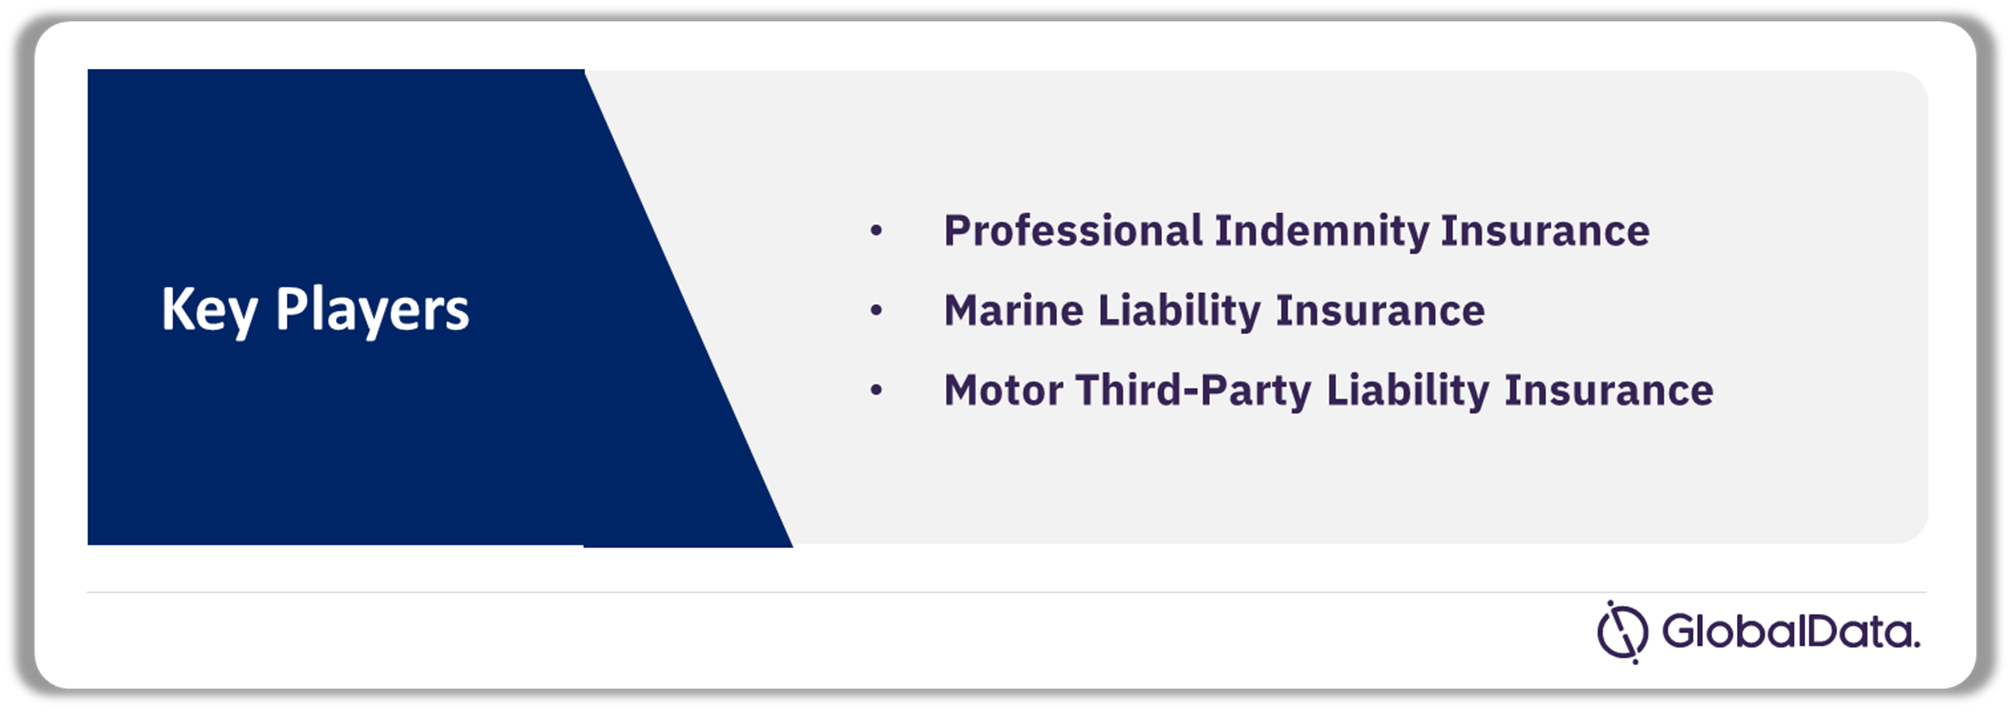 Saint Lucia Insurance Industry Analysis by Compulsory Insurances